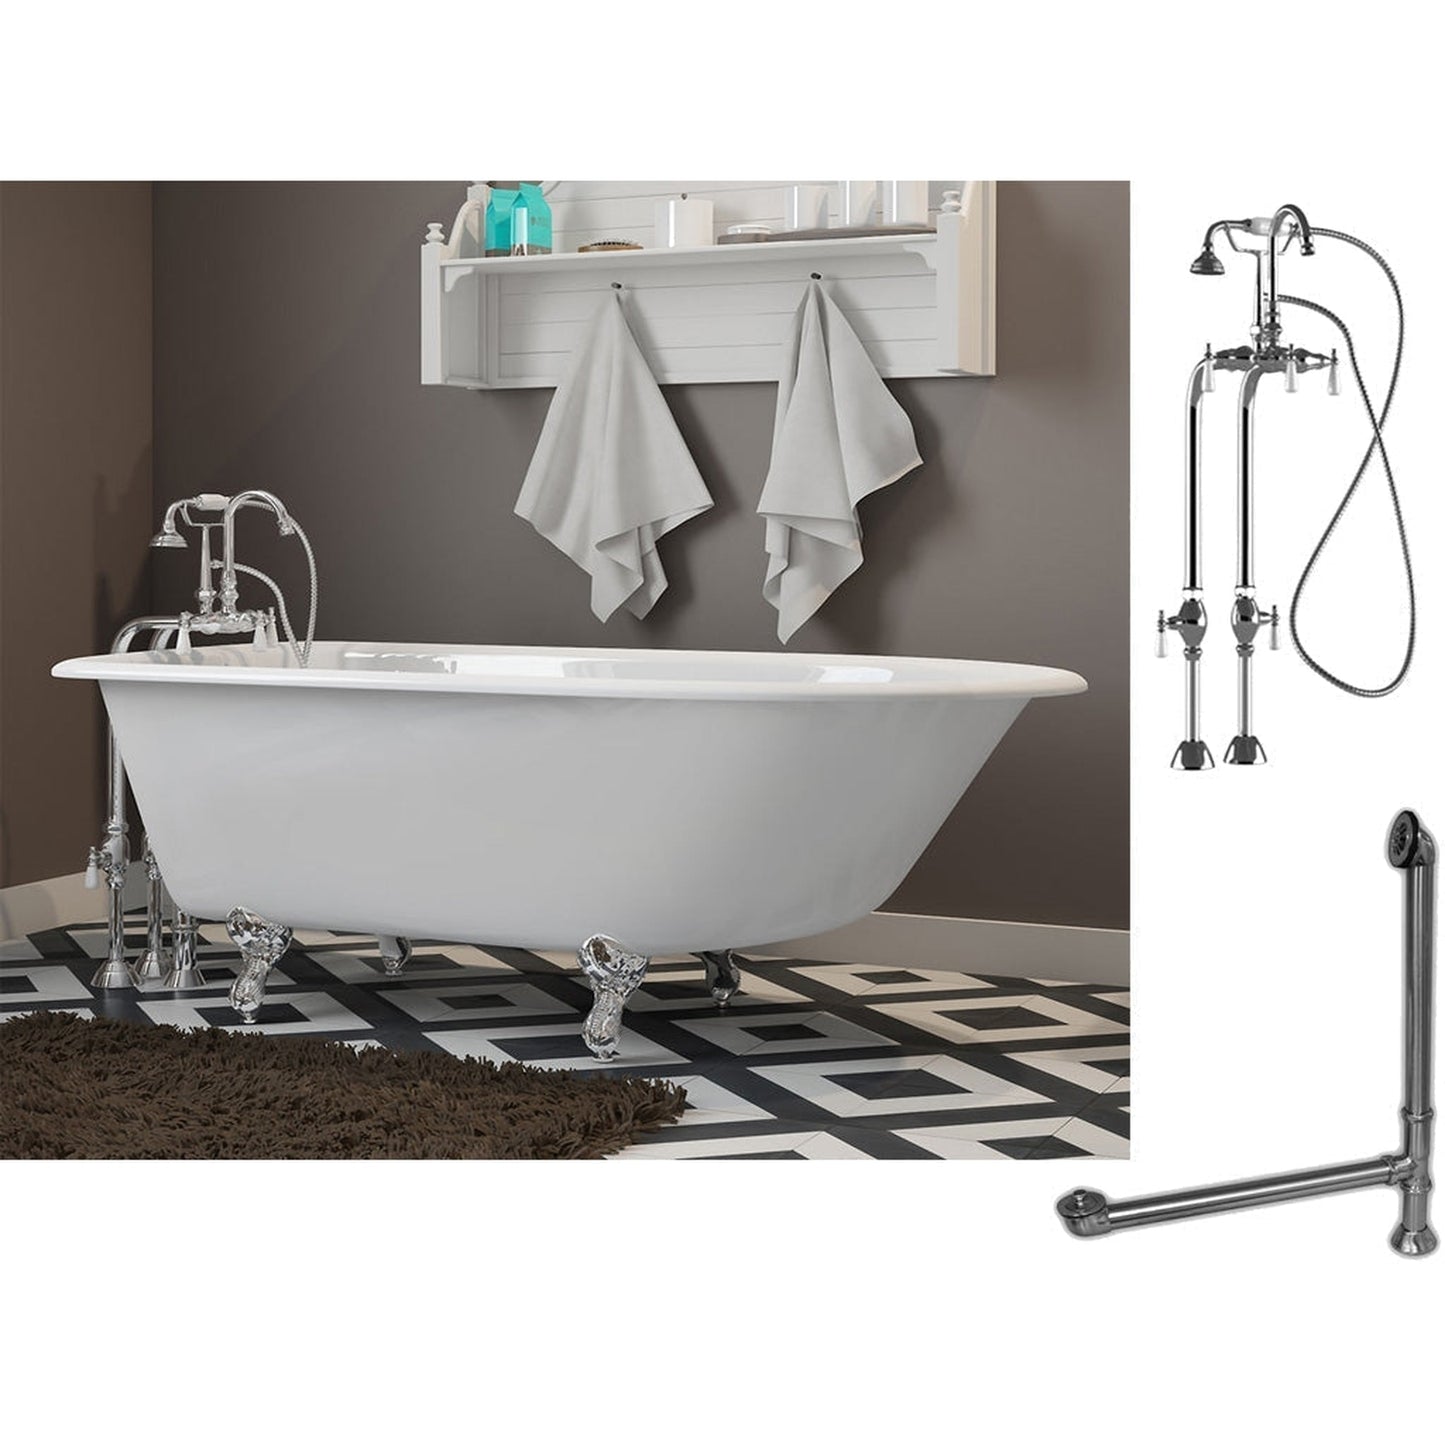 Cambridge Plumbing 60" White Cast Iron Rolled Rim Clawfoot Bathtub With No Deck Holes And Complete Plumbing Package Including Freestanding English Telephone Gooseneck Faucet, Drain And Overflow Assembly In Polished Chrome